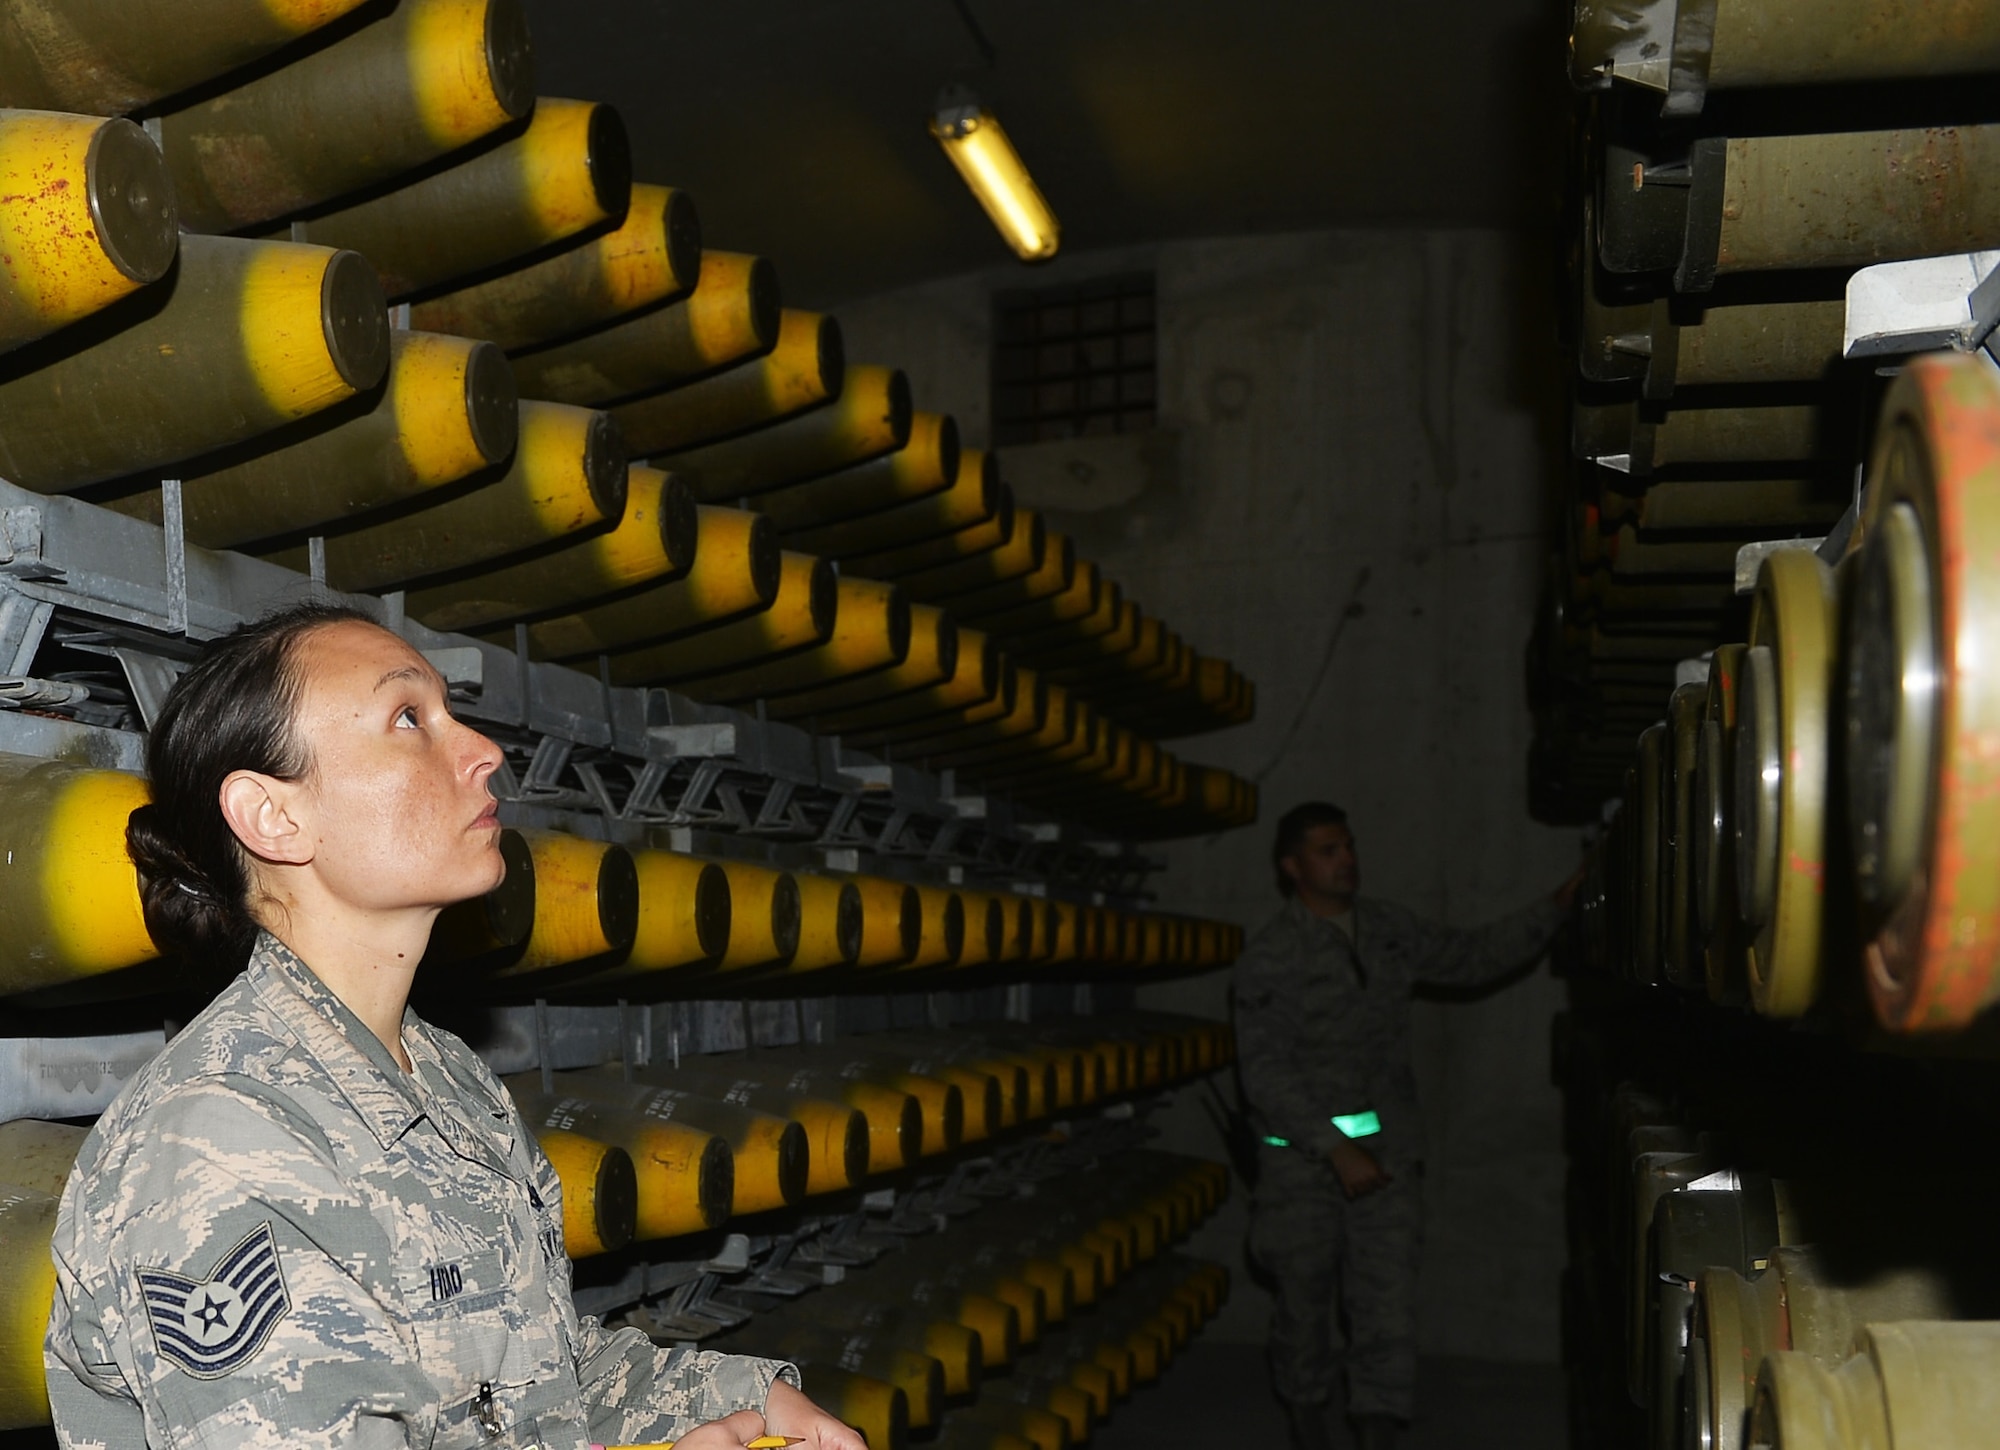 U.S. Air Force Tech. Sgt. Randa Head, 86th Munition Squadron noncommissioned officer in charge of munitions operations, conducts an inventory of munitions at Ramstein Air Base, Germany, Sept. 19, 2017. The 86th MUNS provides support throughout the U.S. Air Forces in Europe and Air Forces Africa area of responsibility. (U.S. Air Force photo by Airman 1st Class Joshua Magbanua)